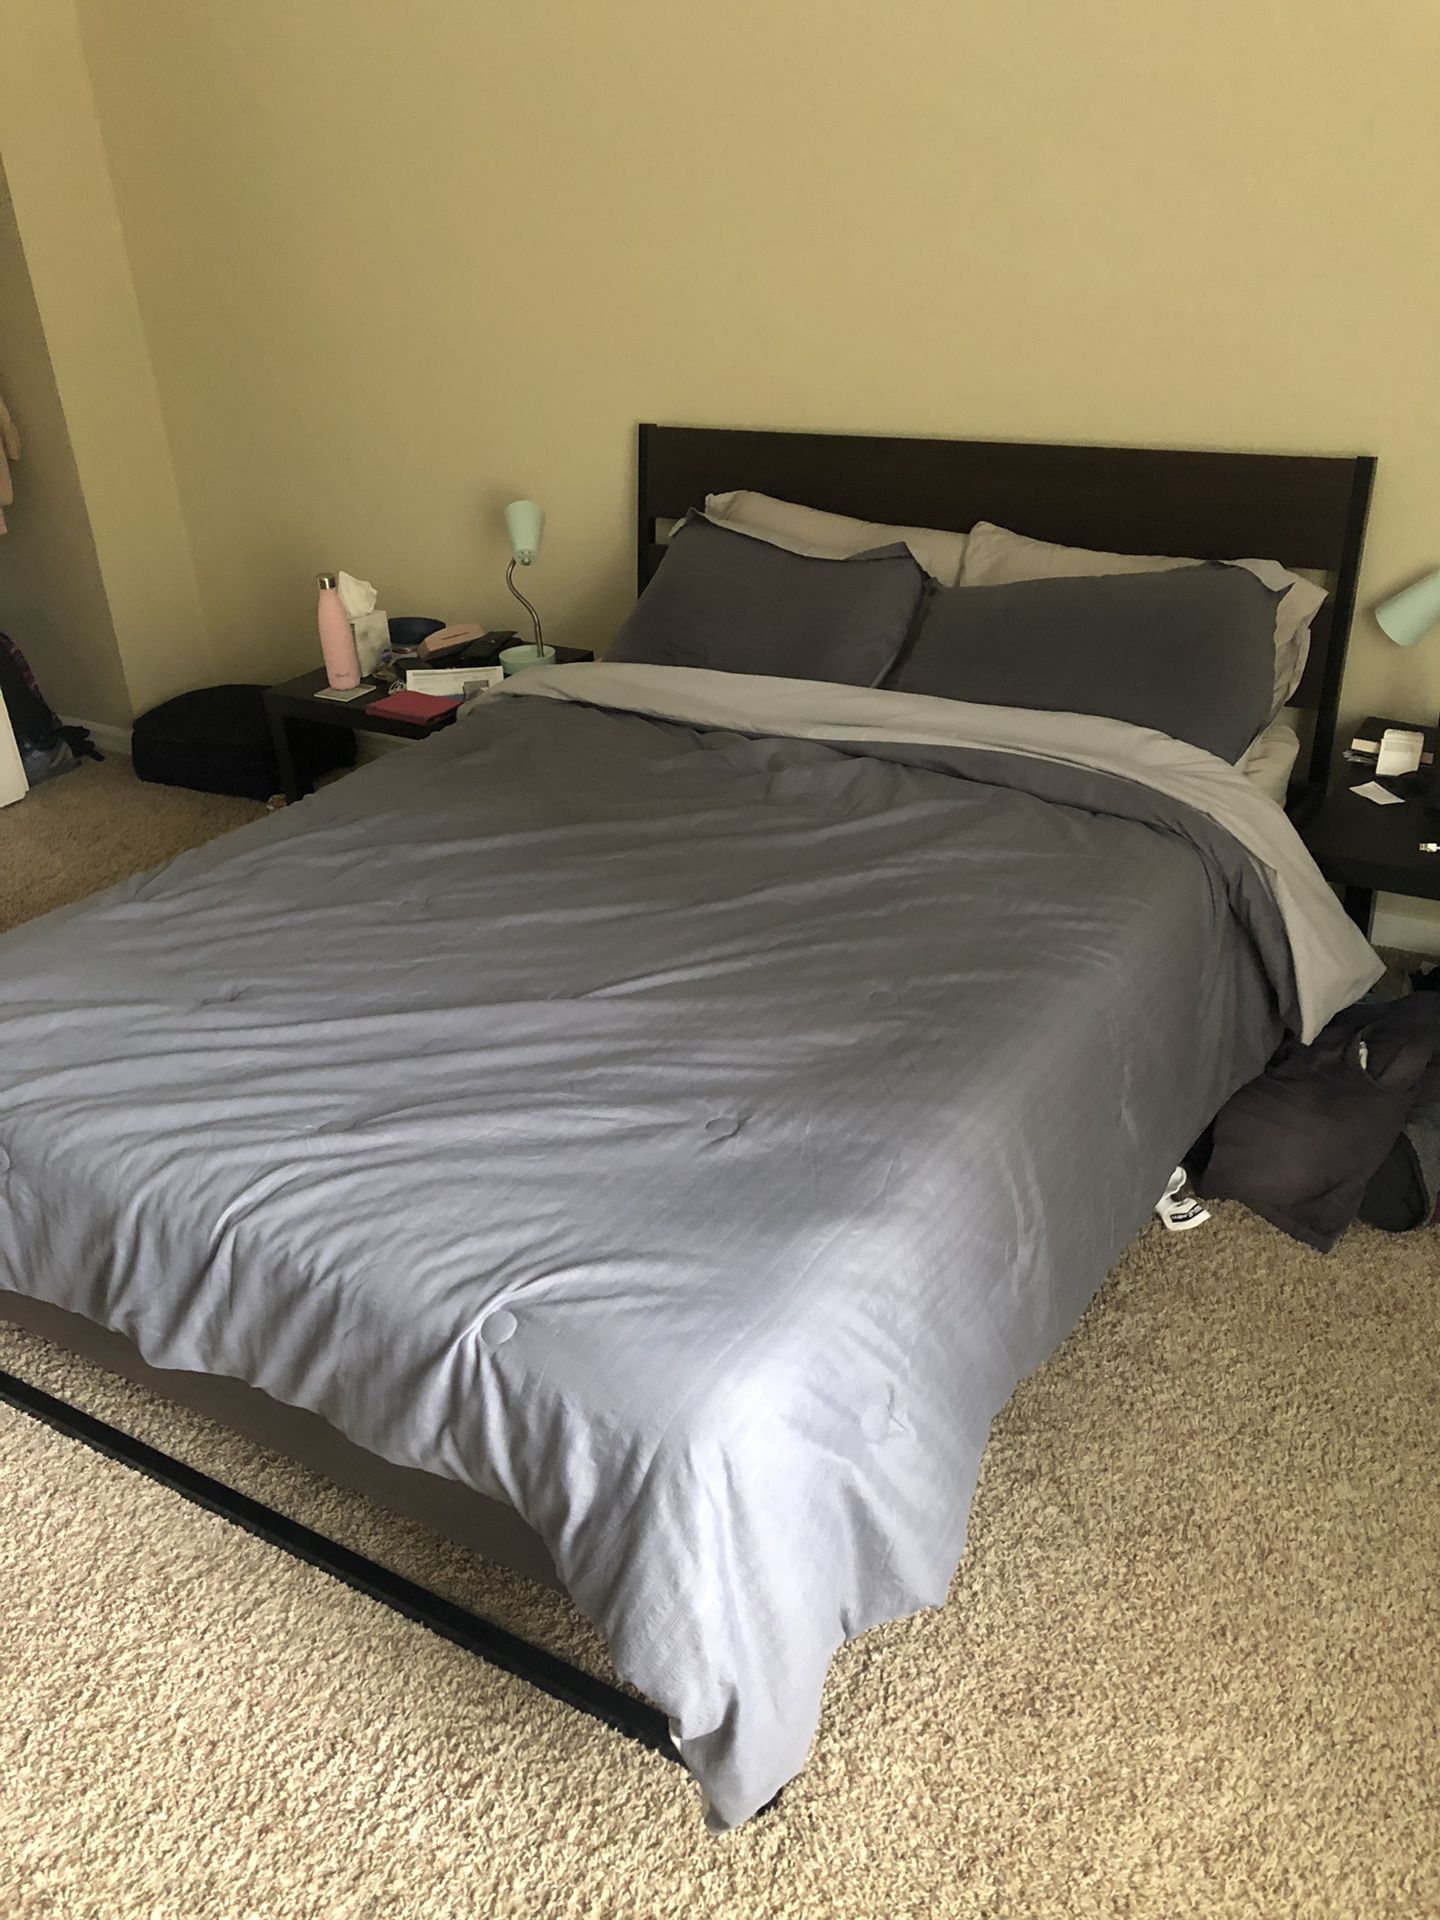 Bed frame and mattress- less than a year old